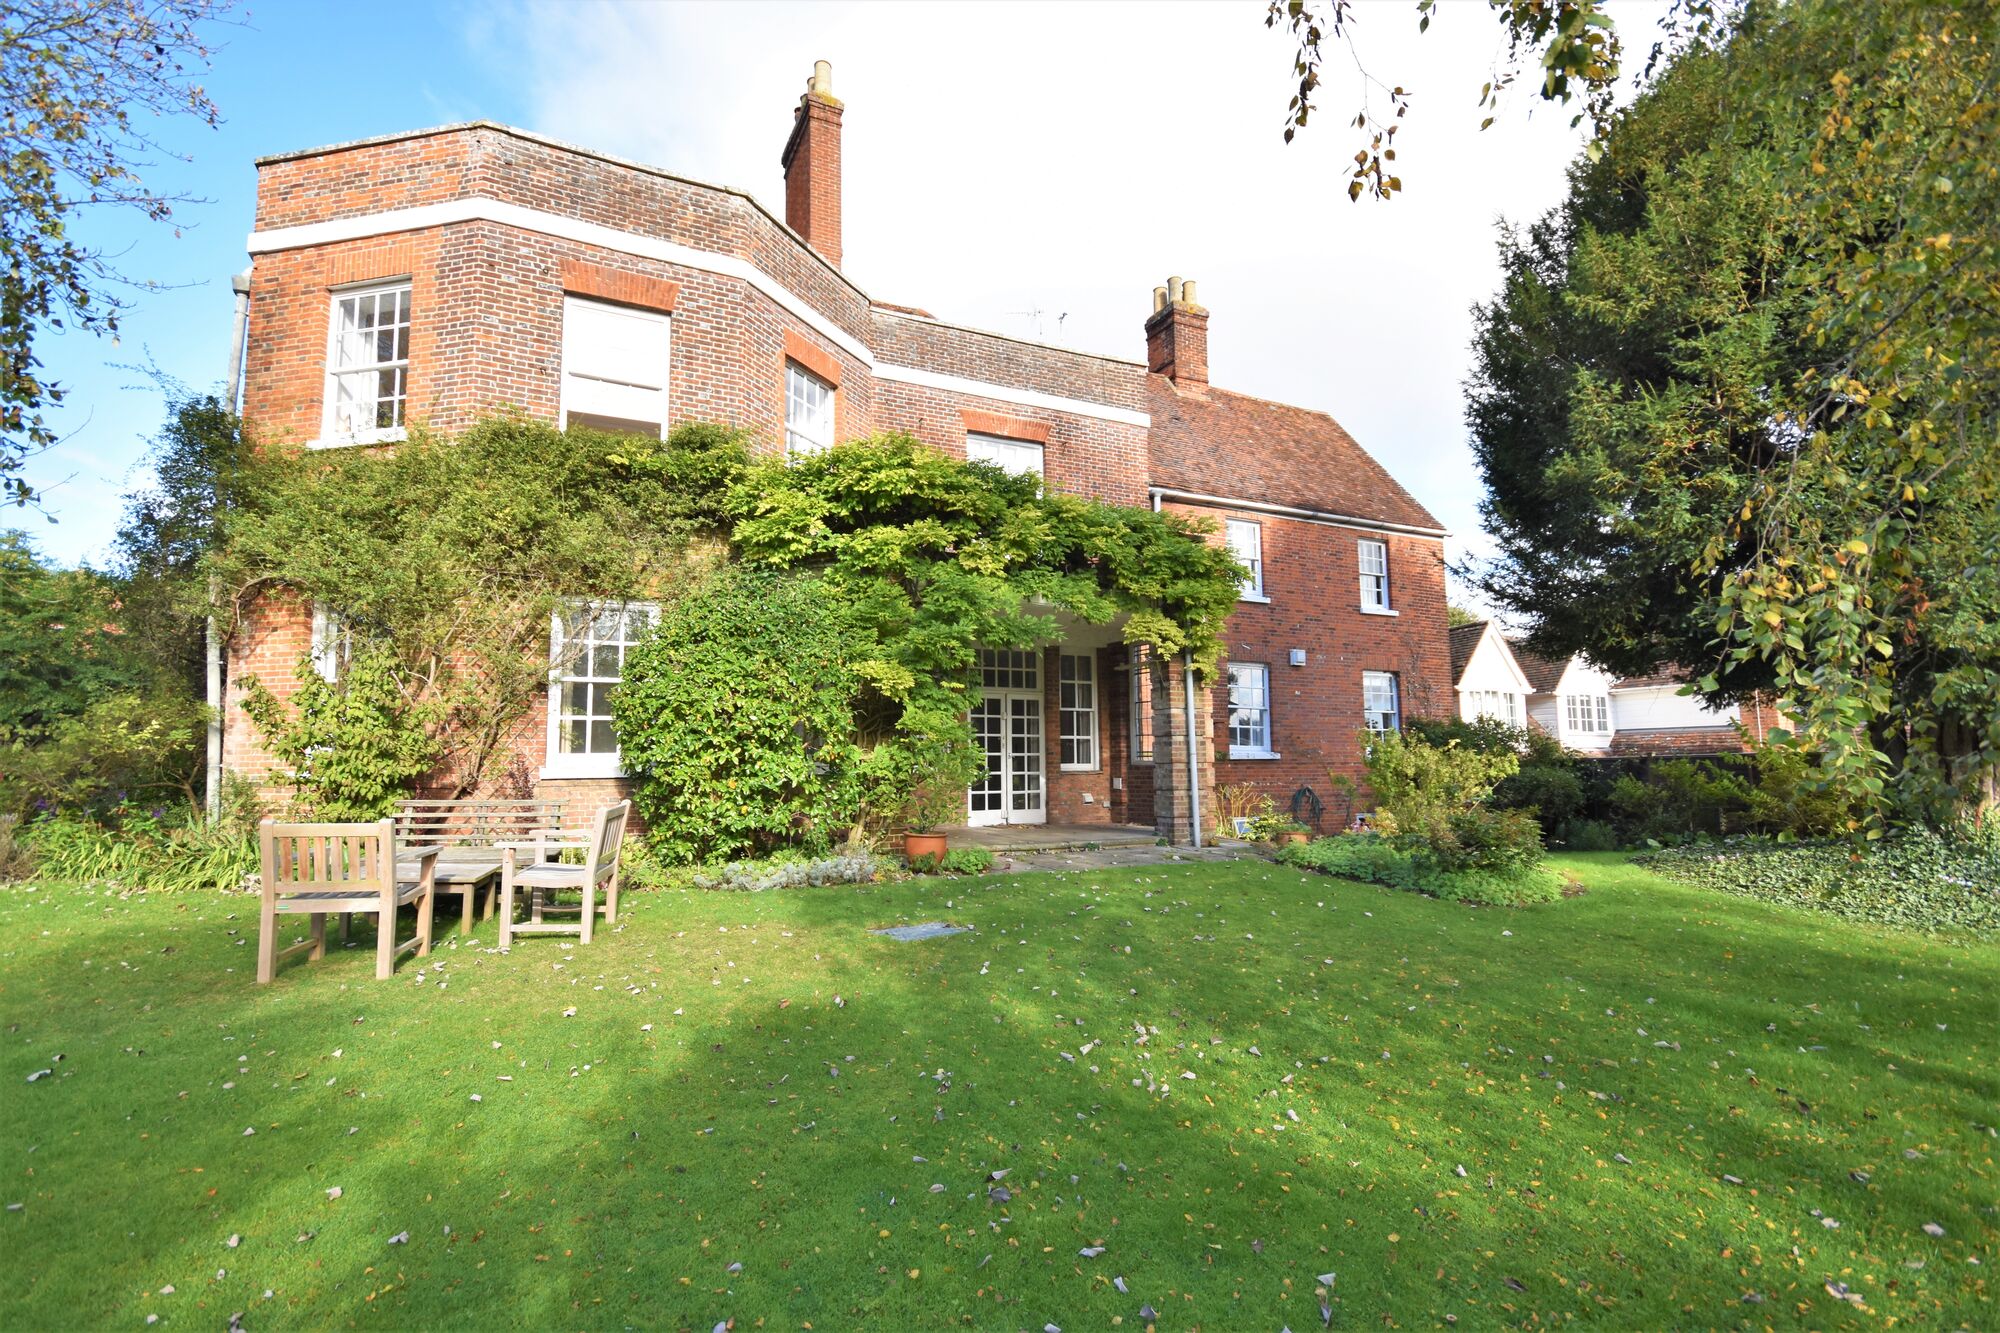 3 bedroom  flat to rent, Available unfurnished from 14/03/2025 Castle Hill House, Saffron Walden, CB10, main image